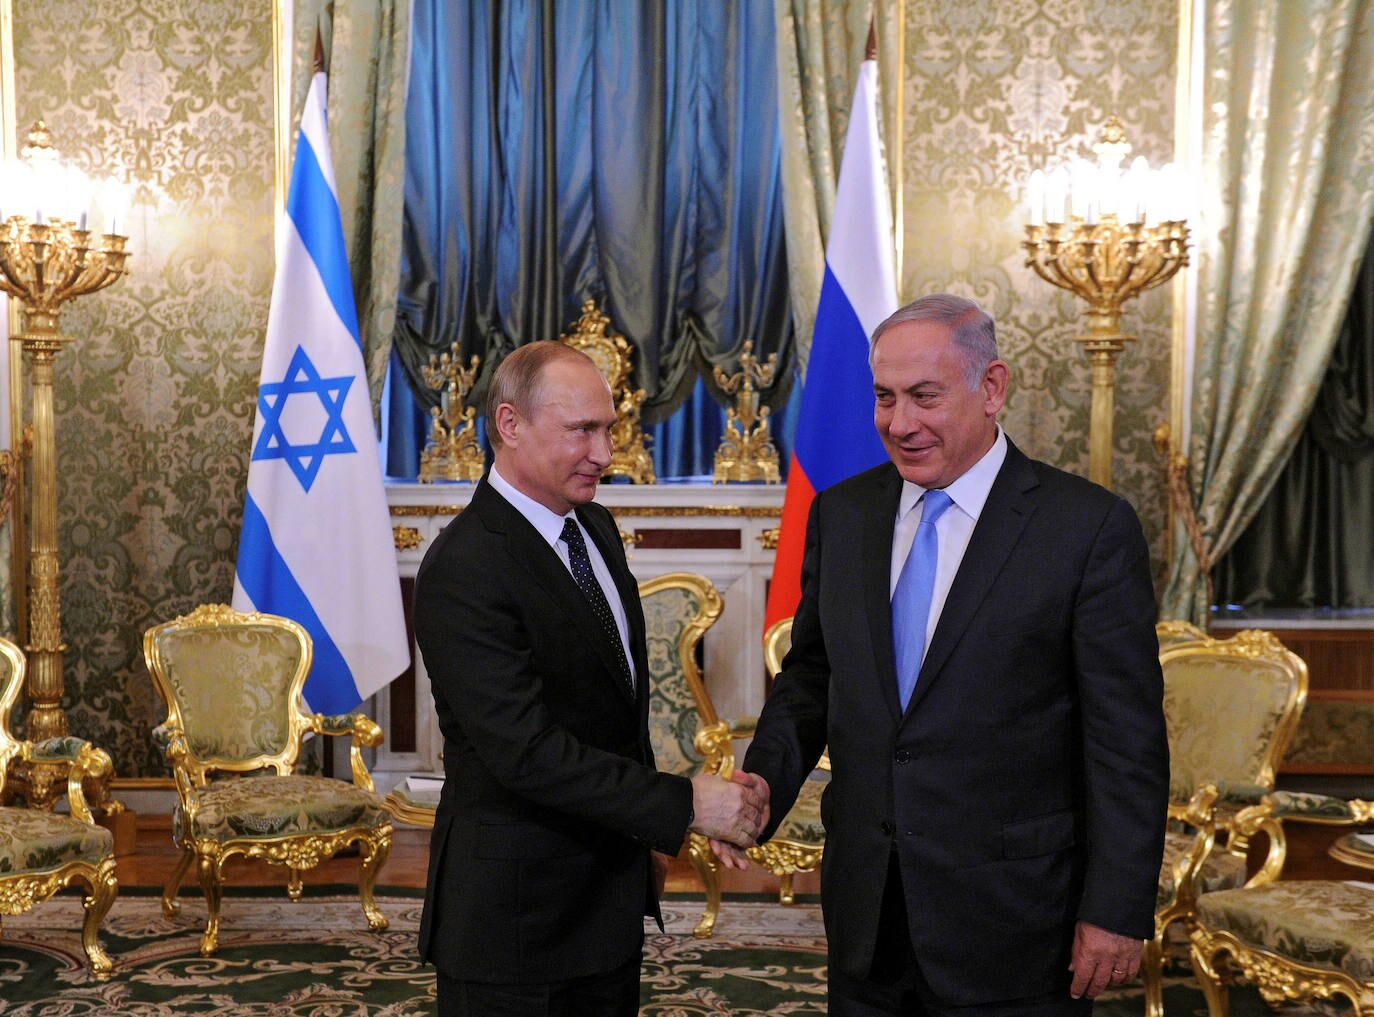 Meeting in the Kremlin between the Russian President and the President of Israel, when Netanyahu was Israeli Prime Minister